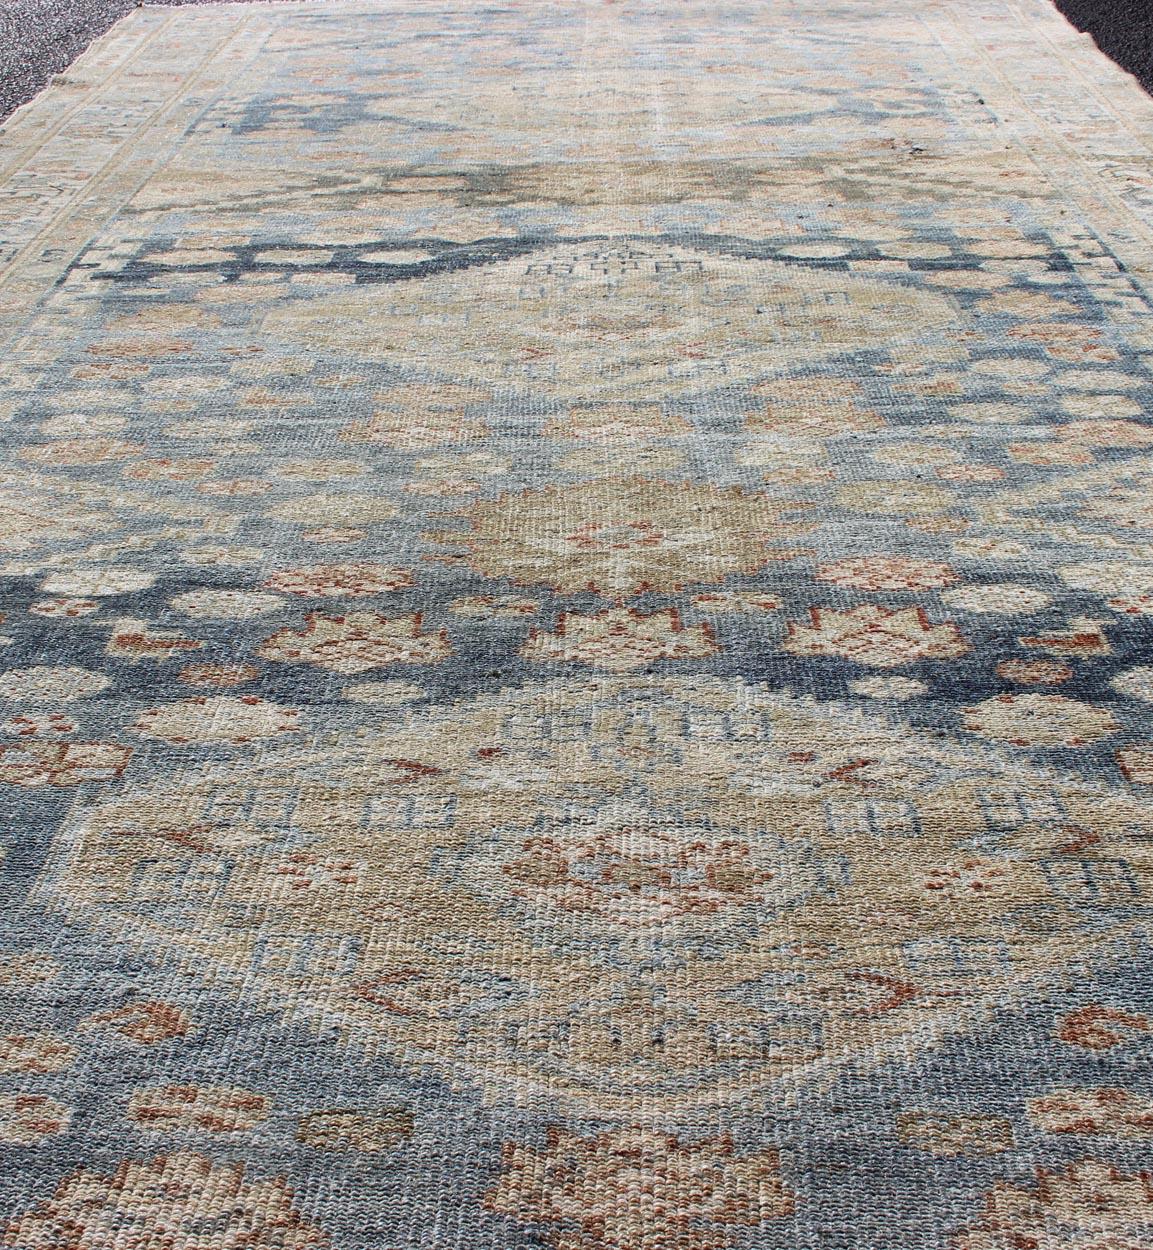 Tribal Persian Malayer Rug with Geometric Design in Steel Blue and Tan Tones 2